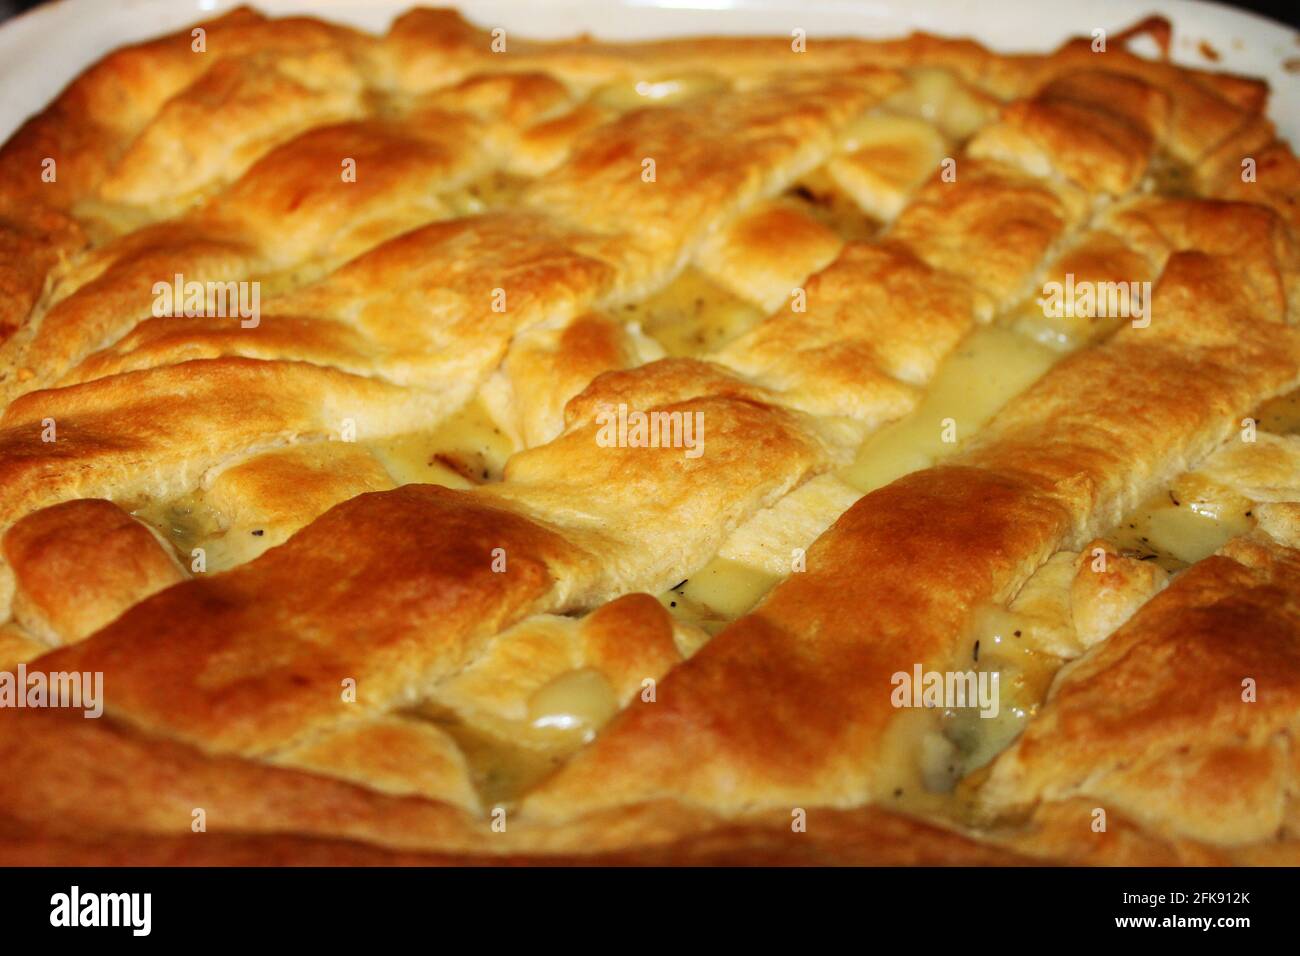 Close-up of a homemade chicken pot pie in a baking dish. Stock Photo